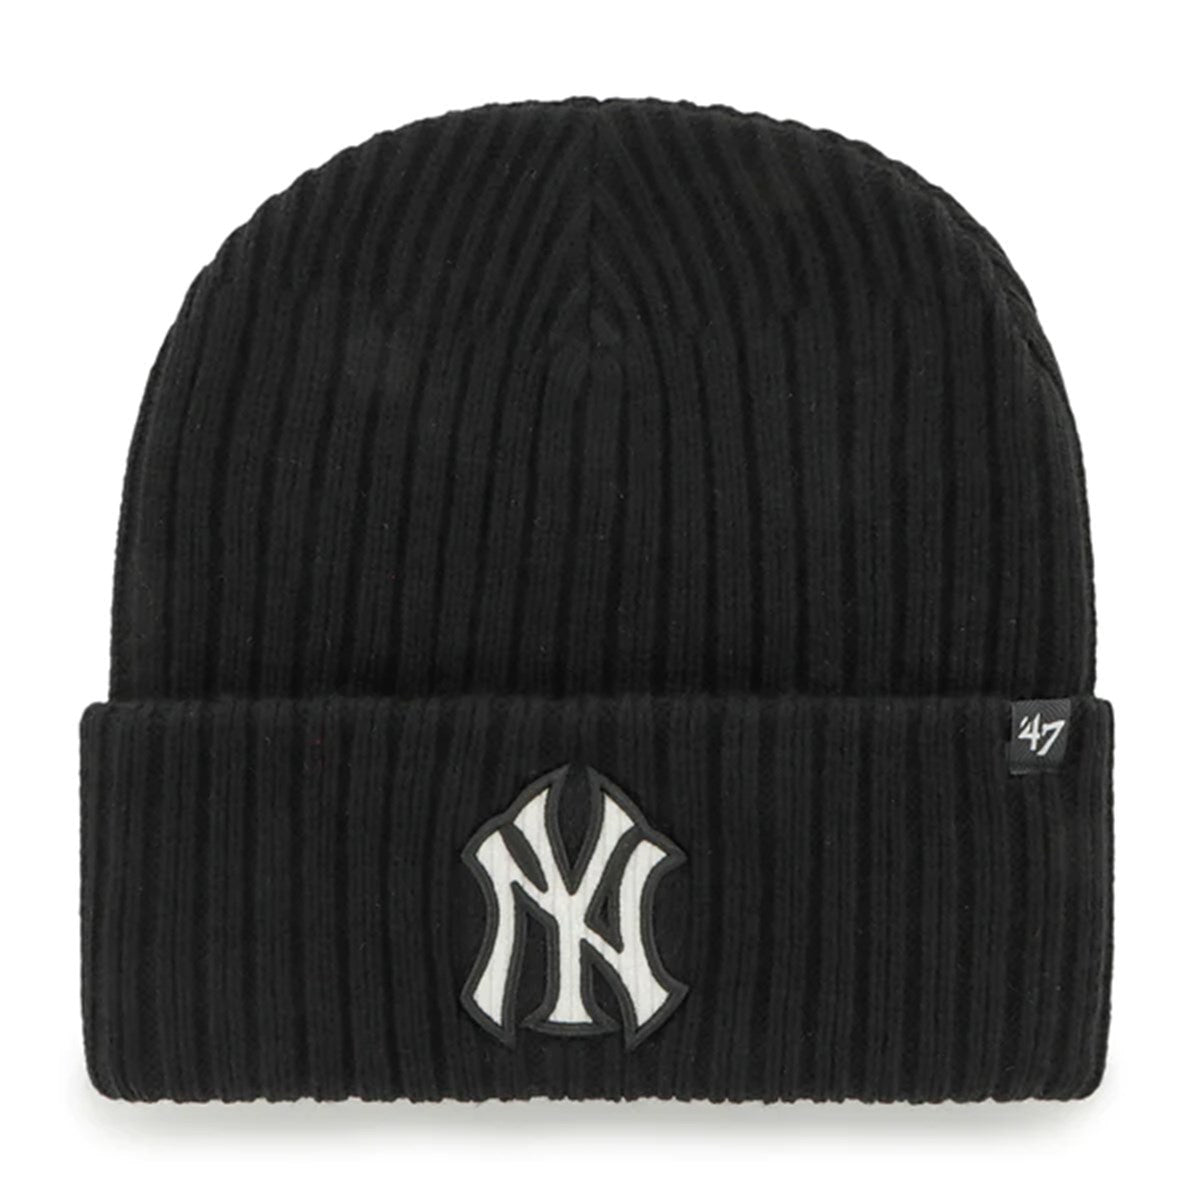 ’47 BRAND YANKEES THICK CORD 47 CUFF KNIT BLACK【THCCK17ACE】